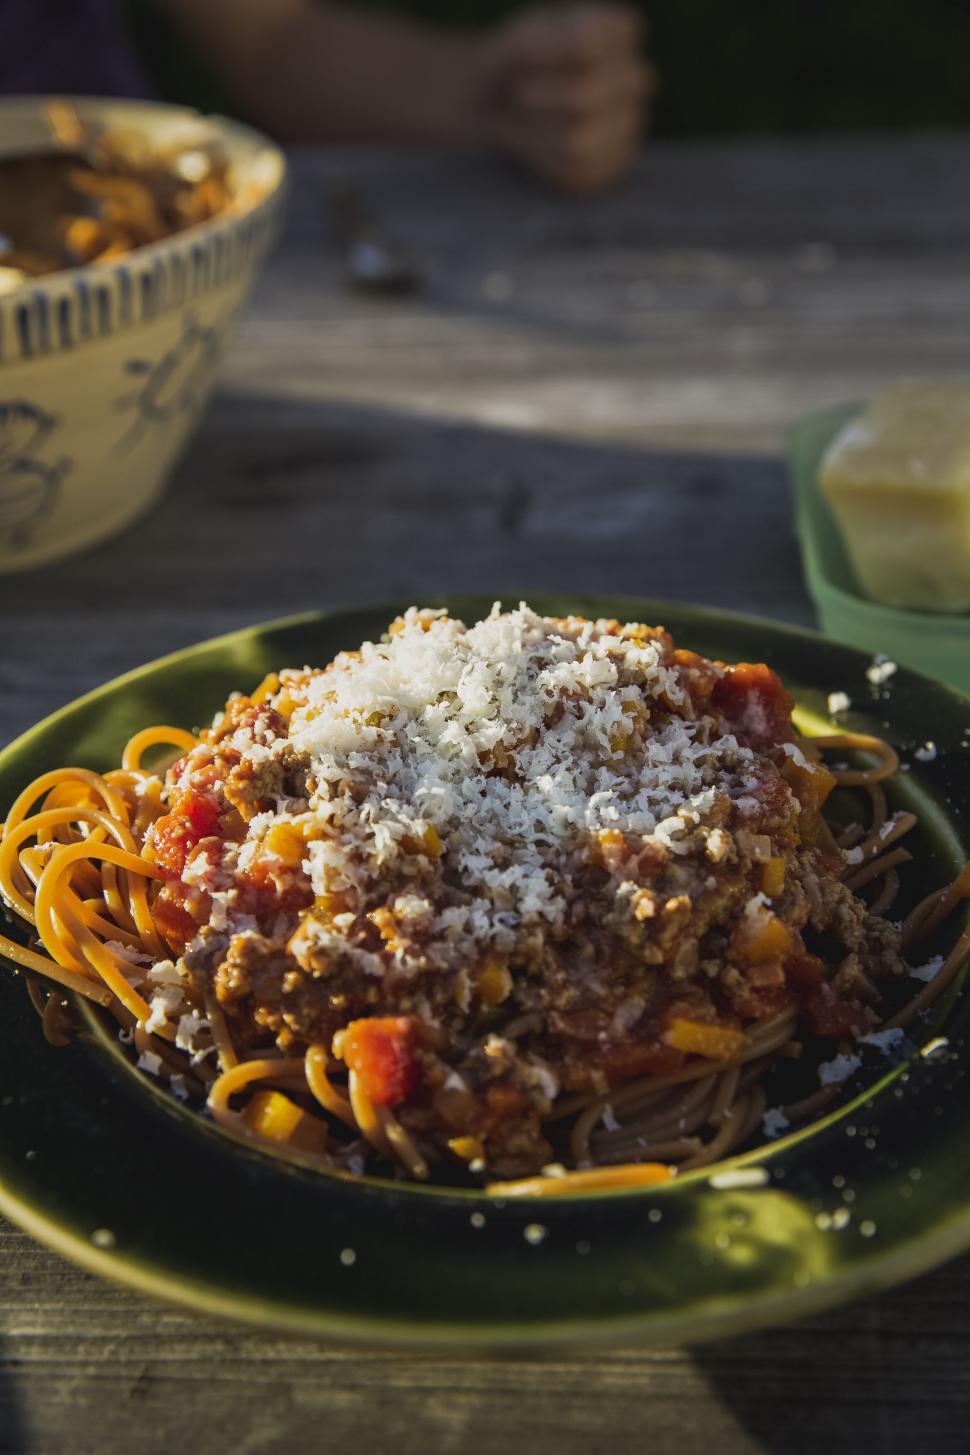 Free Image of Plate of spaghetti with bolognese and cheese 